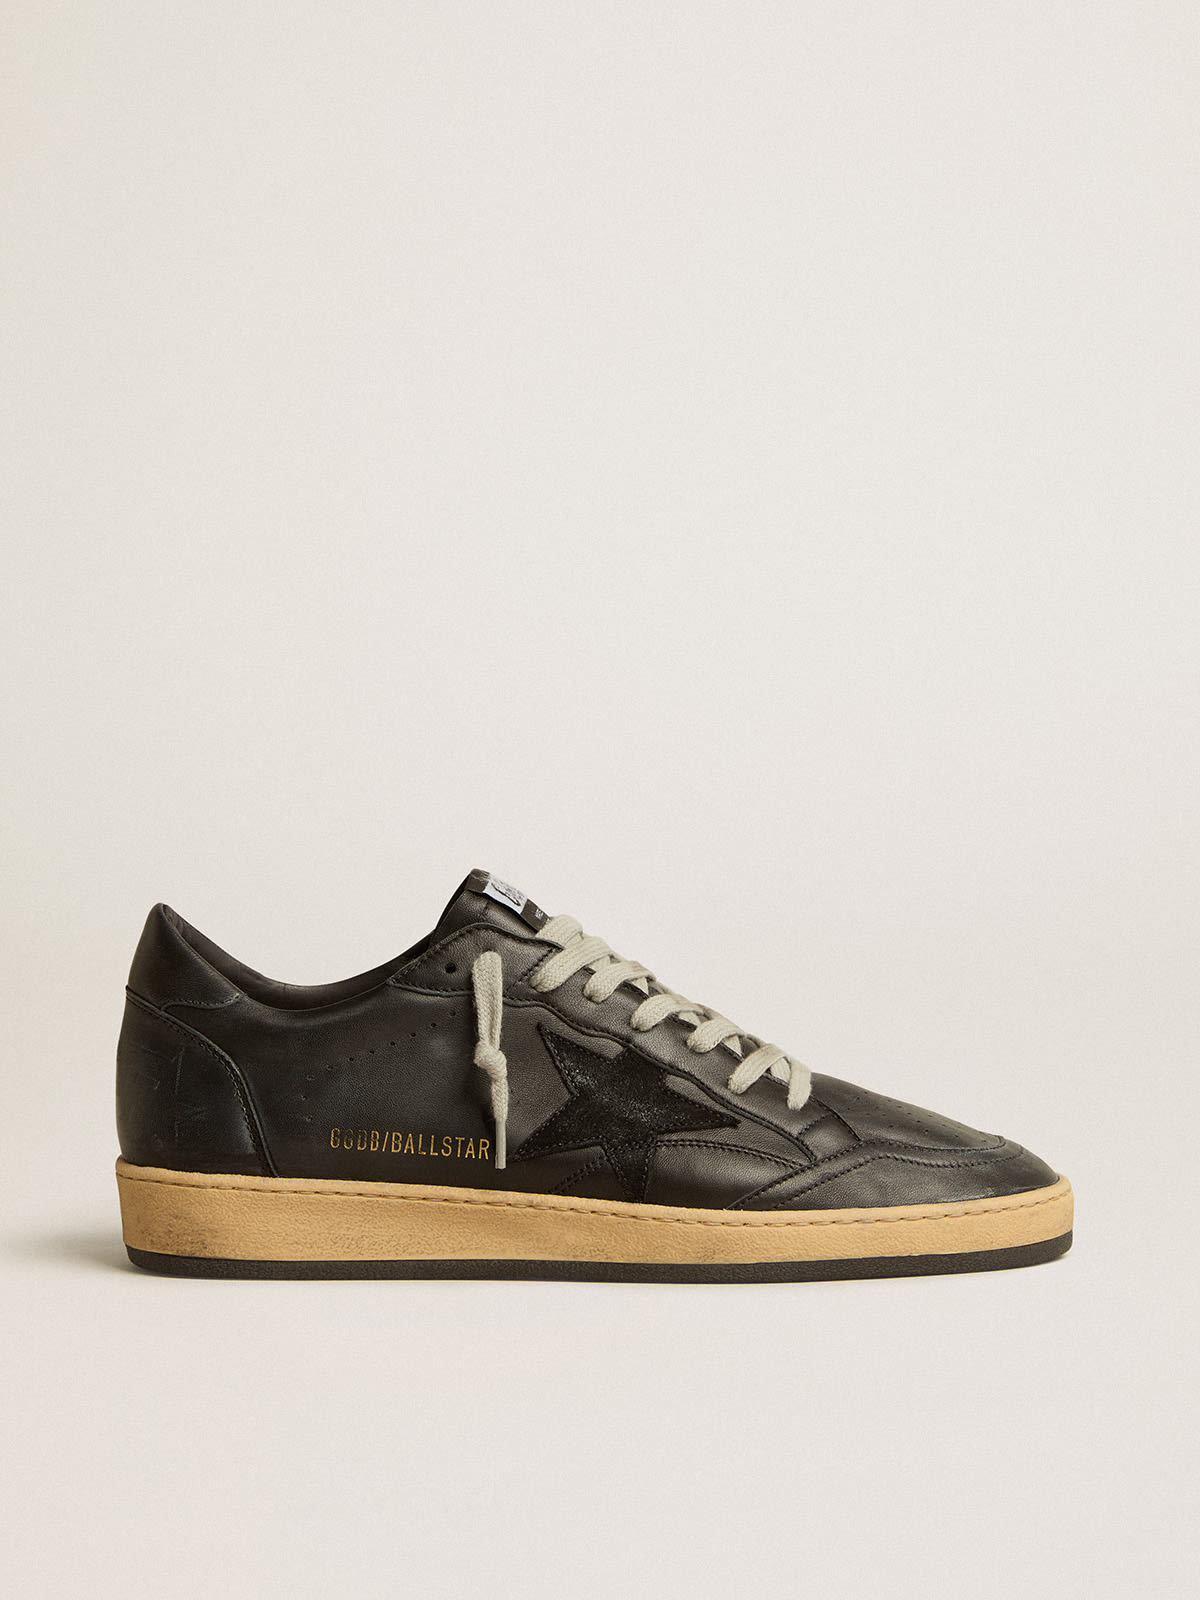 Golden Goose - Ball Star in black nappa with suede star and black nappa heel tab in 